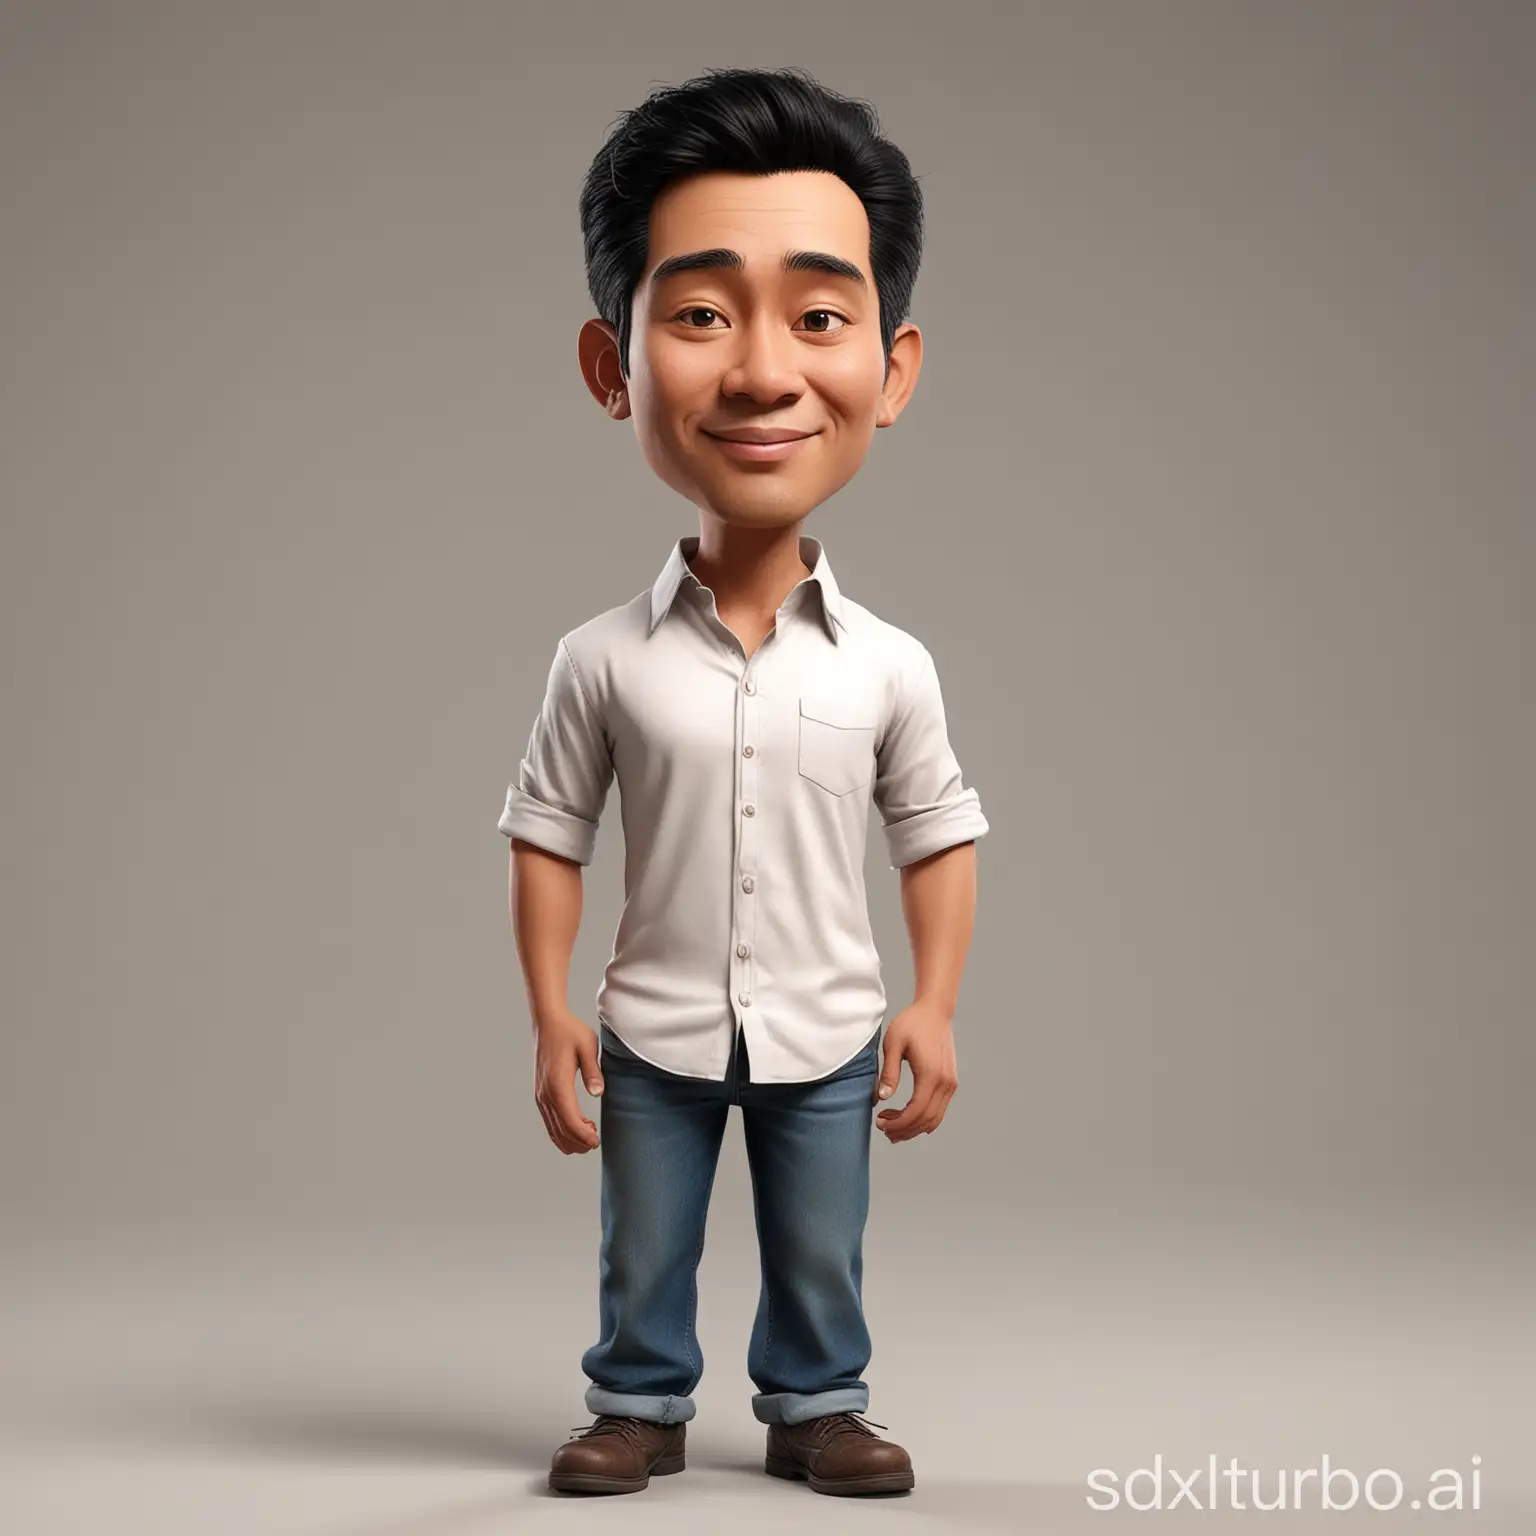 50YearOld-Indonesian-Man-with-Oval-Face-in-Cartoon-Style